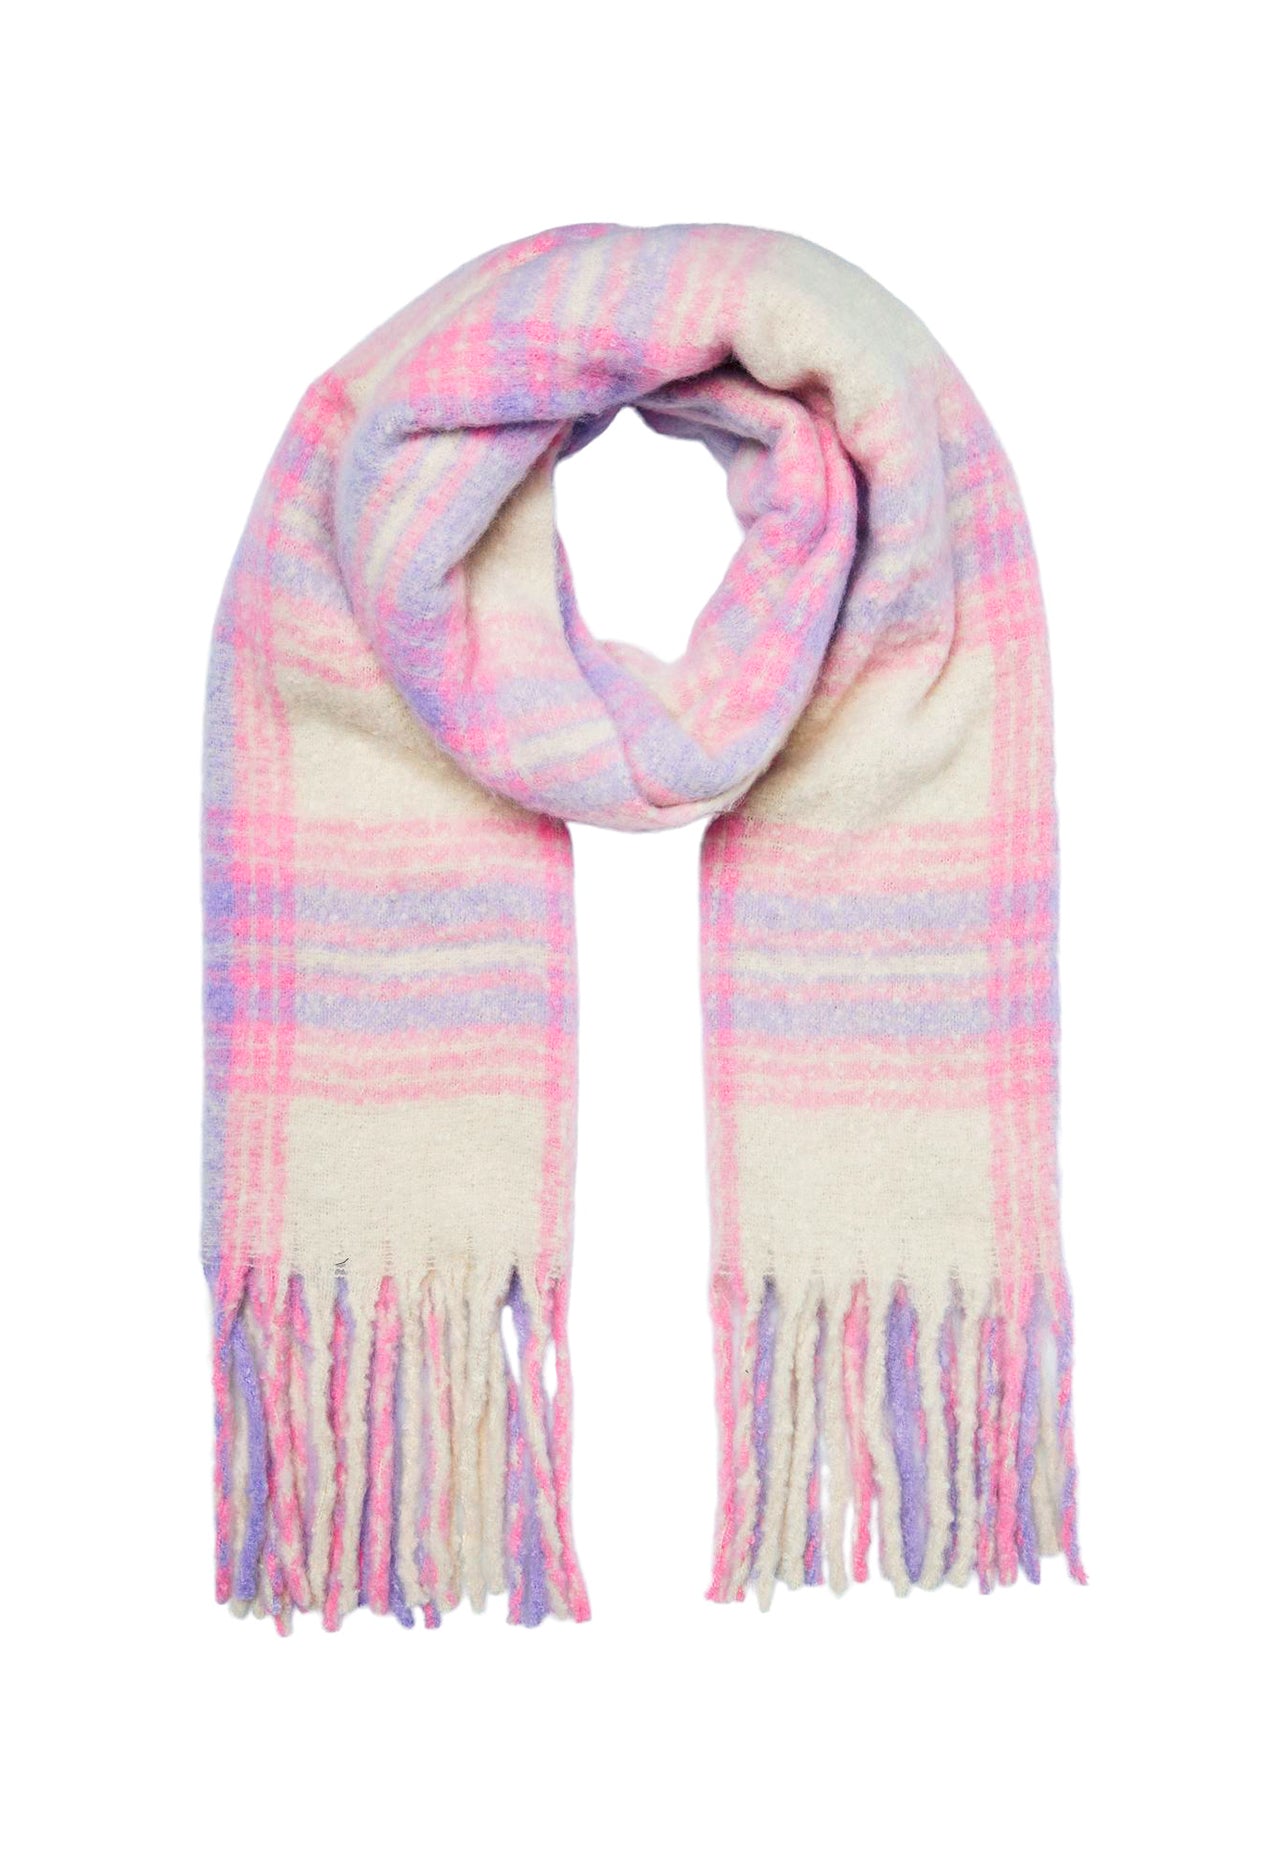 
                  
                    VERO MODA Minty Oversized Heavyweight Brushed Check Scarf with Tassels in Baby Pink, Lilac & Cream - One Nation Clothing
                  
                